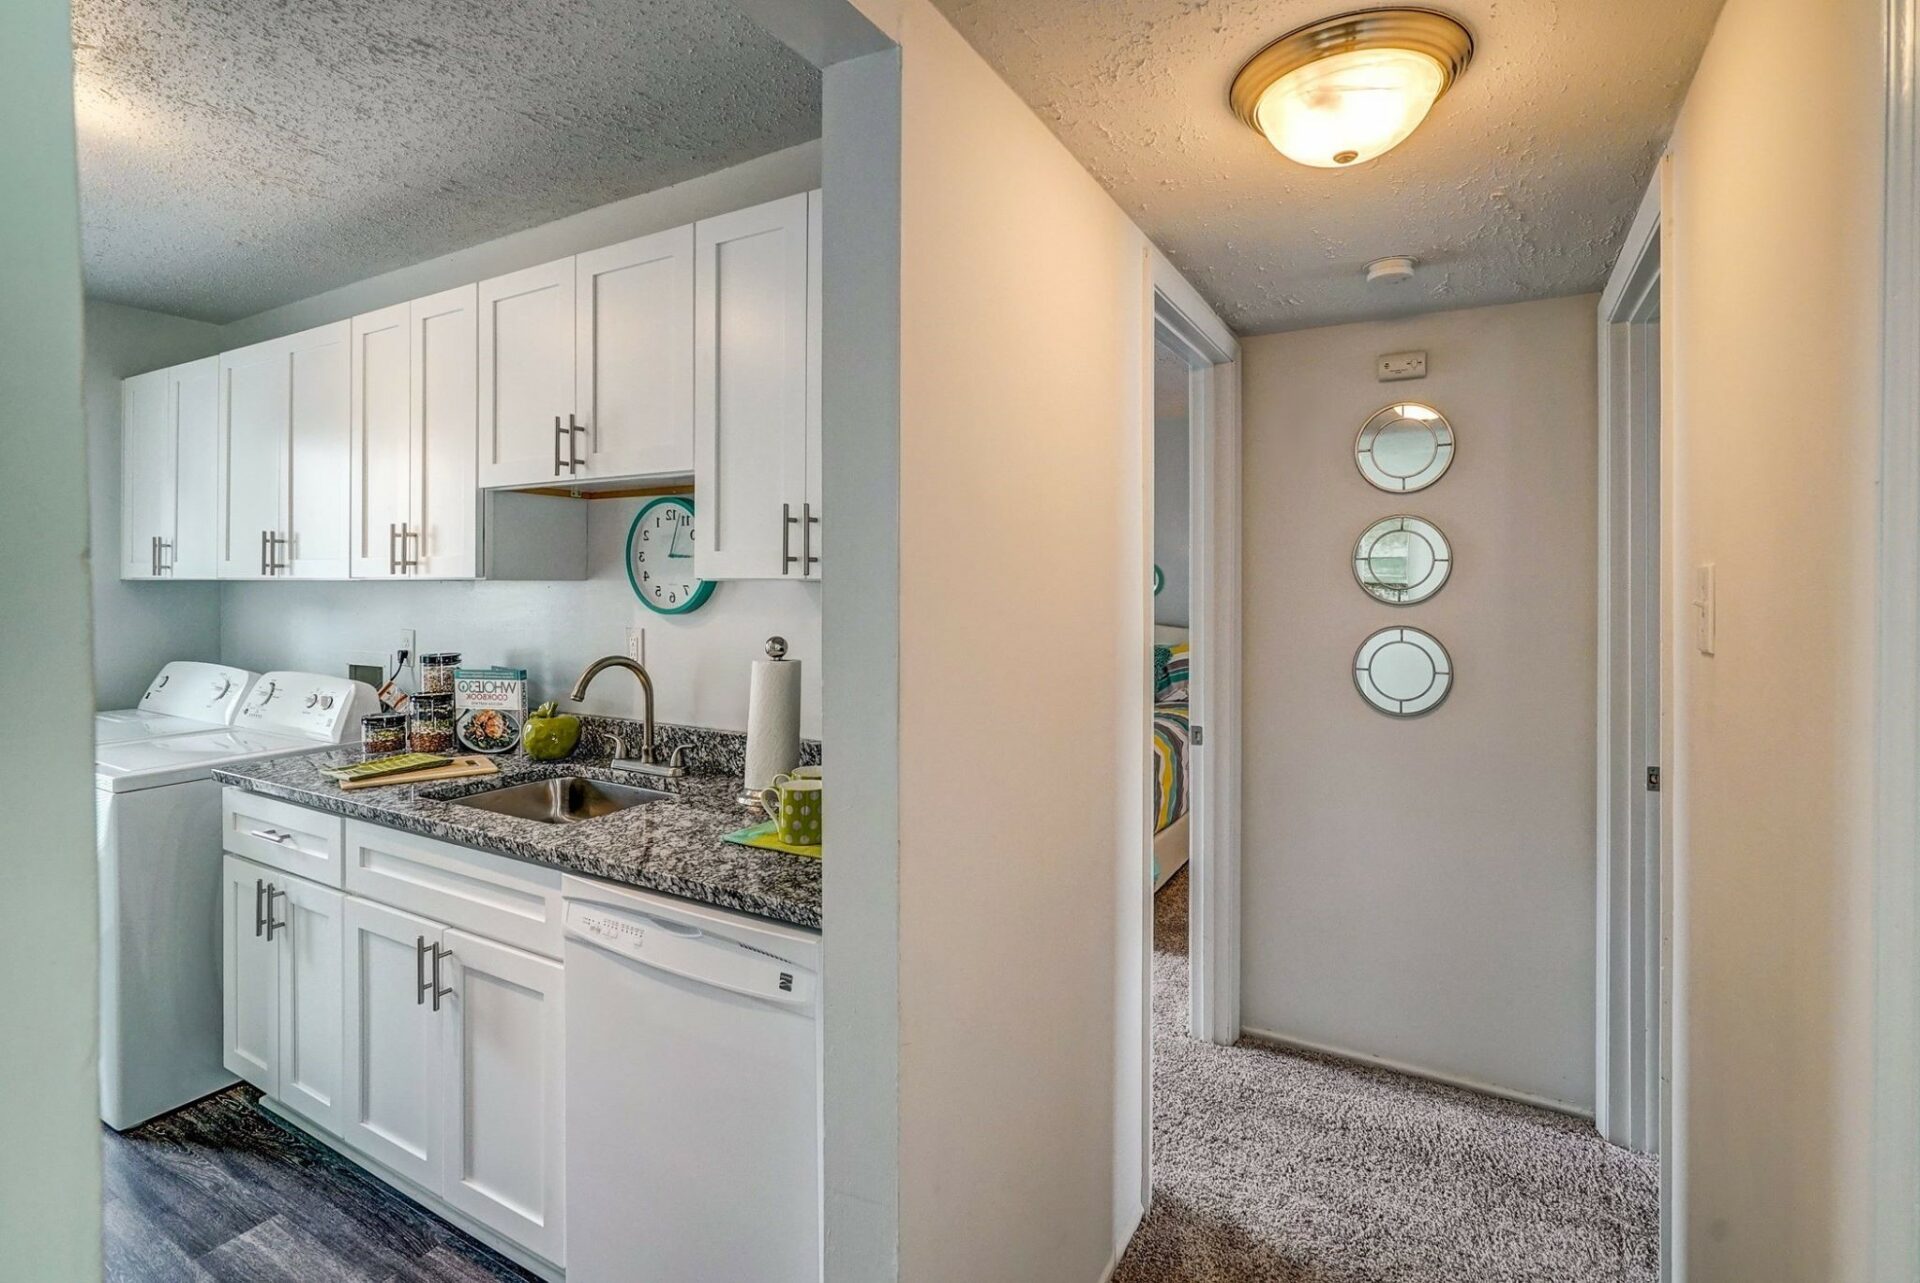 Picture of a hallway leading from a kitchen with white cabinets